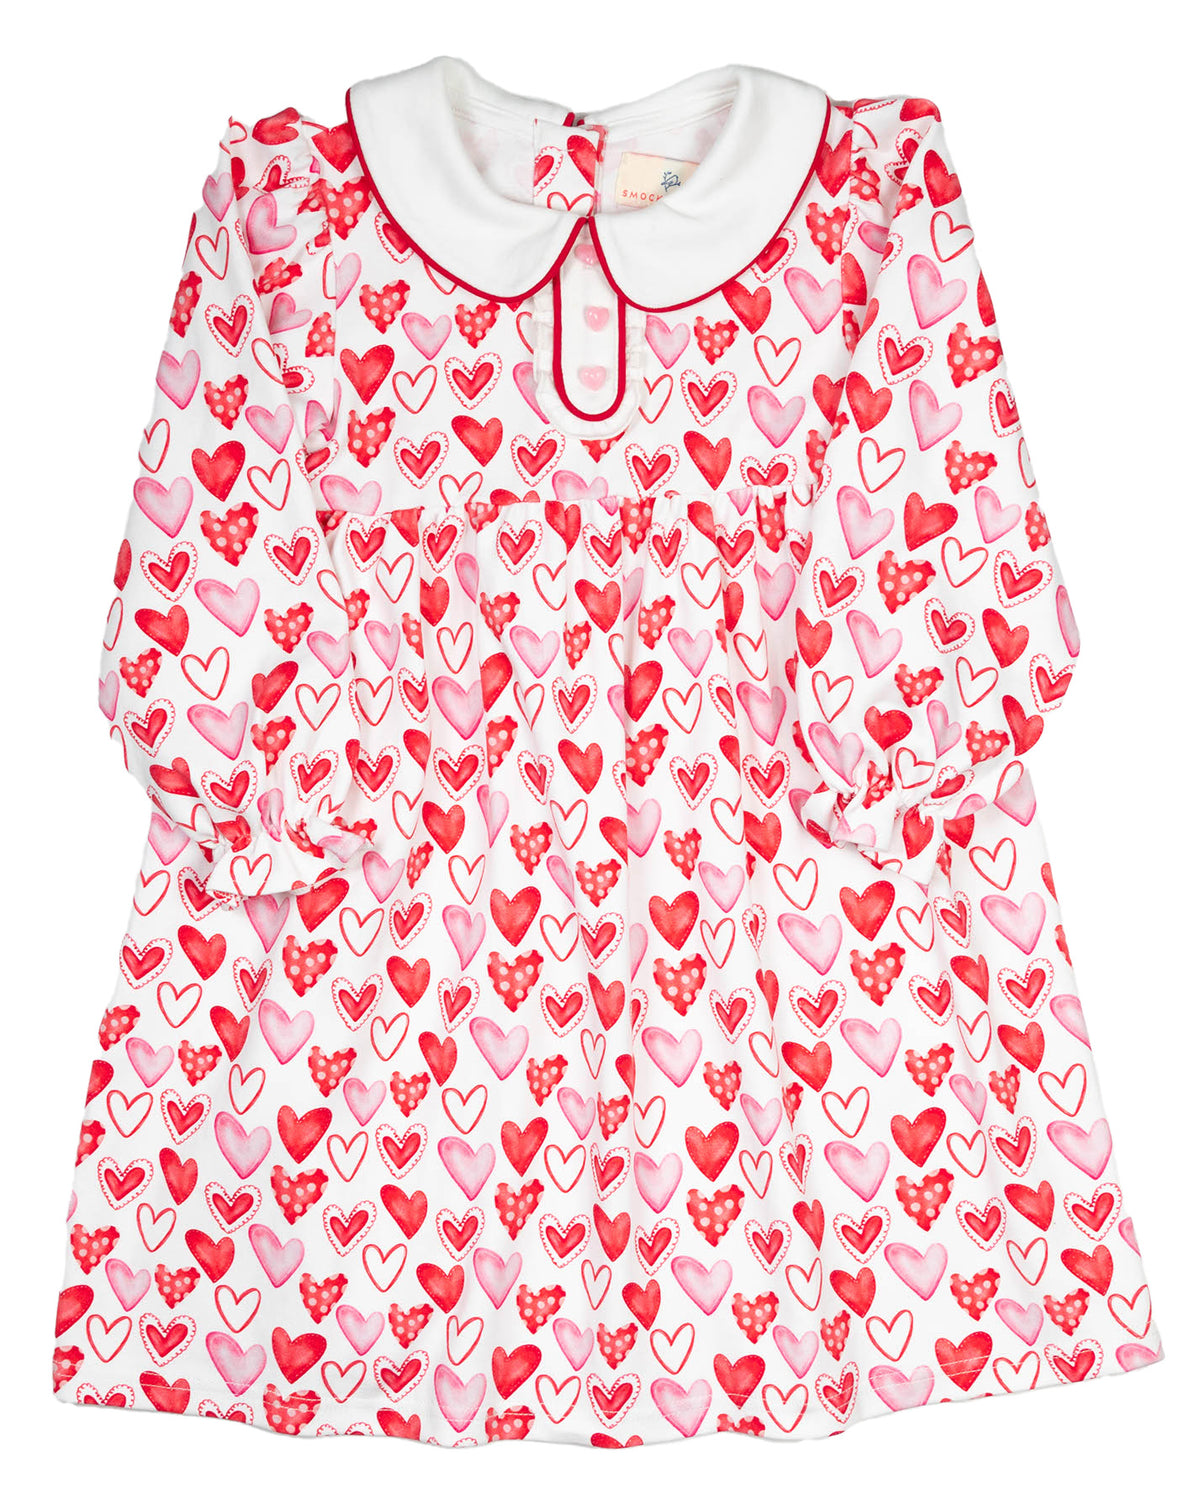 Whimsical Hearts Knit Dress